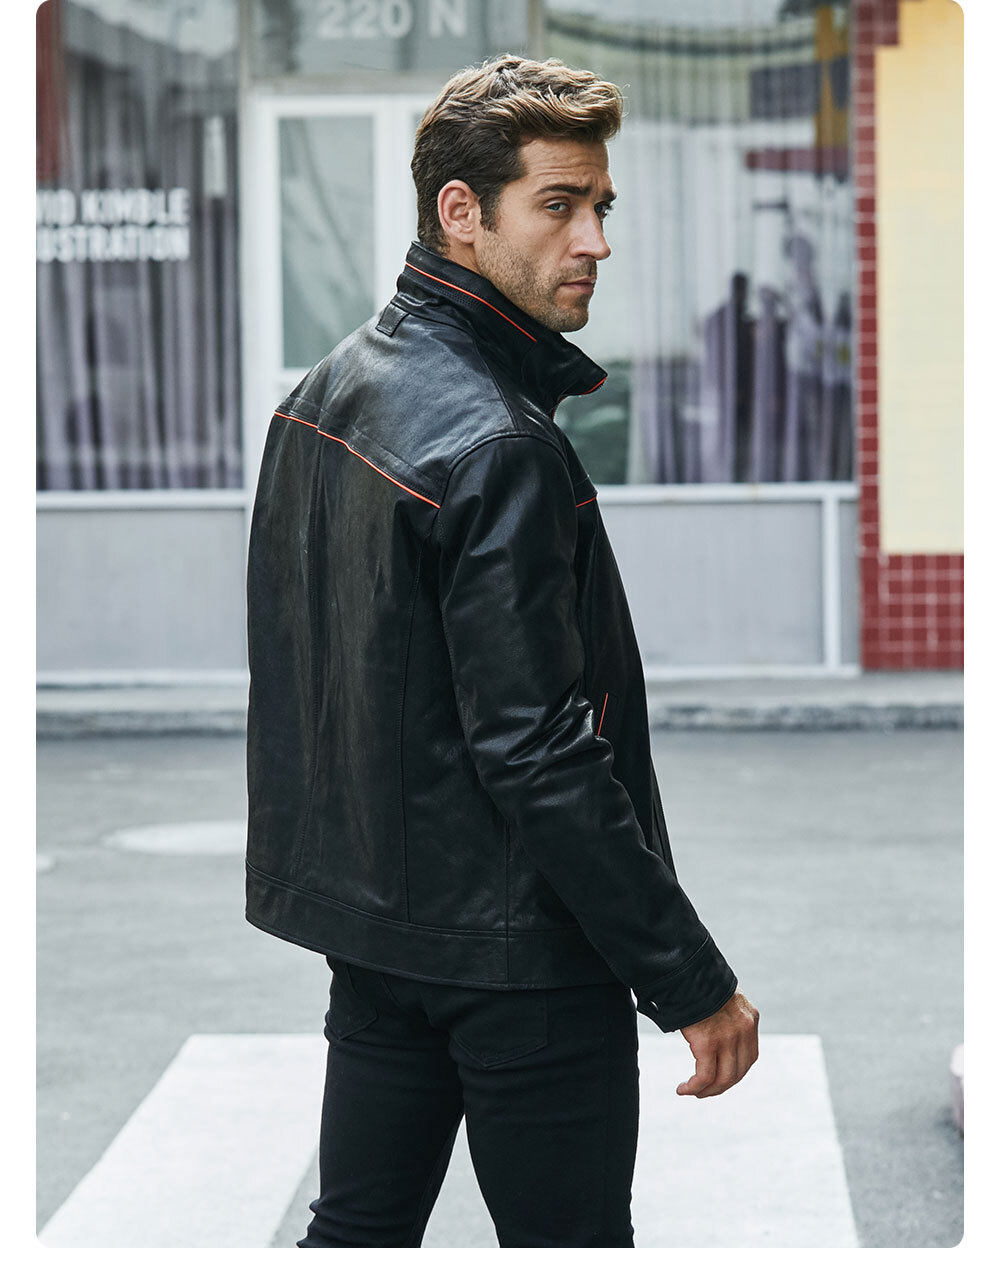 Men's Leather Stand Collar Jacket MXGX285 100% polyester flavor leather stand collar jacket| flavor leather genuine stand collar rib botton jacket